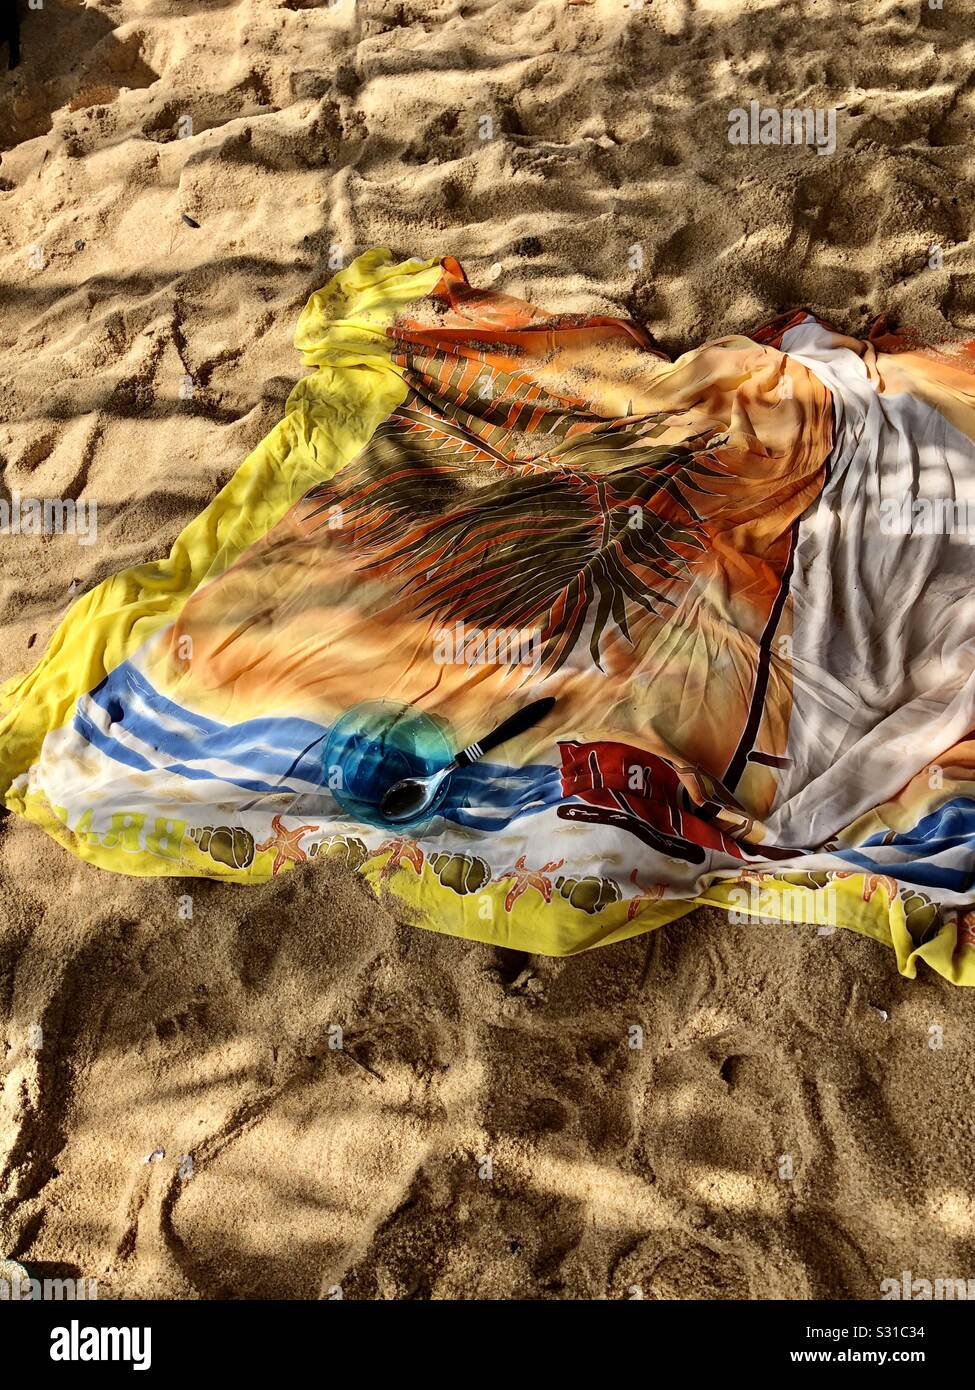 Surfers Discarded Beach Wrap in the Leafy Shadows of a Secluded Beach Hut, RJ, Brazil Stock Photo